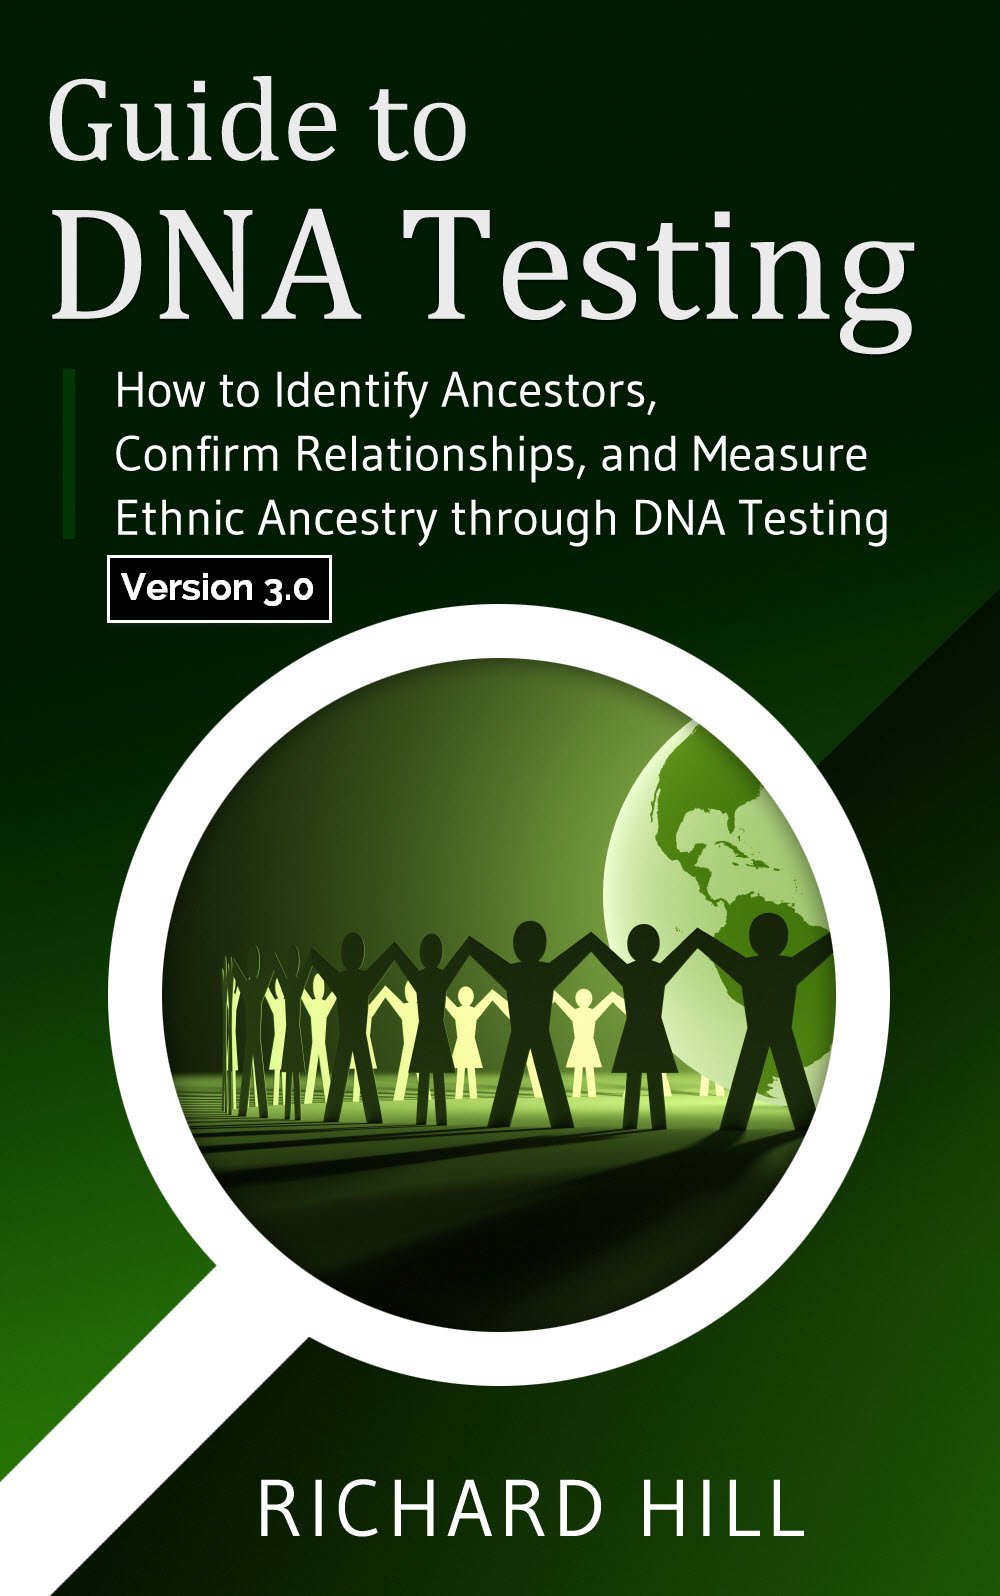 Book Cover: "Guide to DNA Testing"